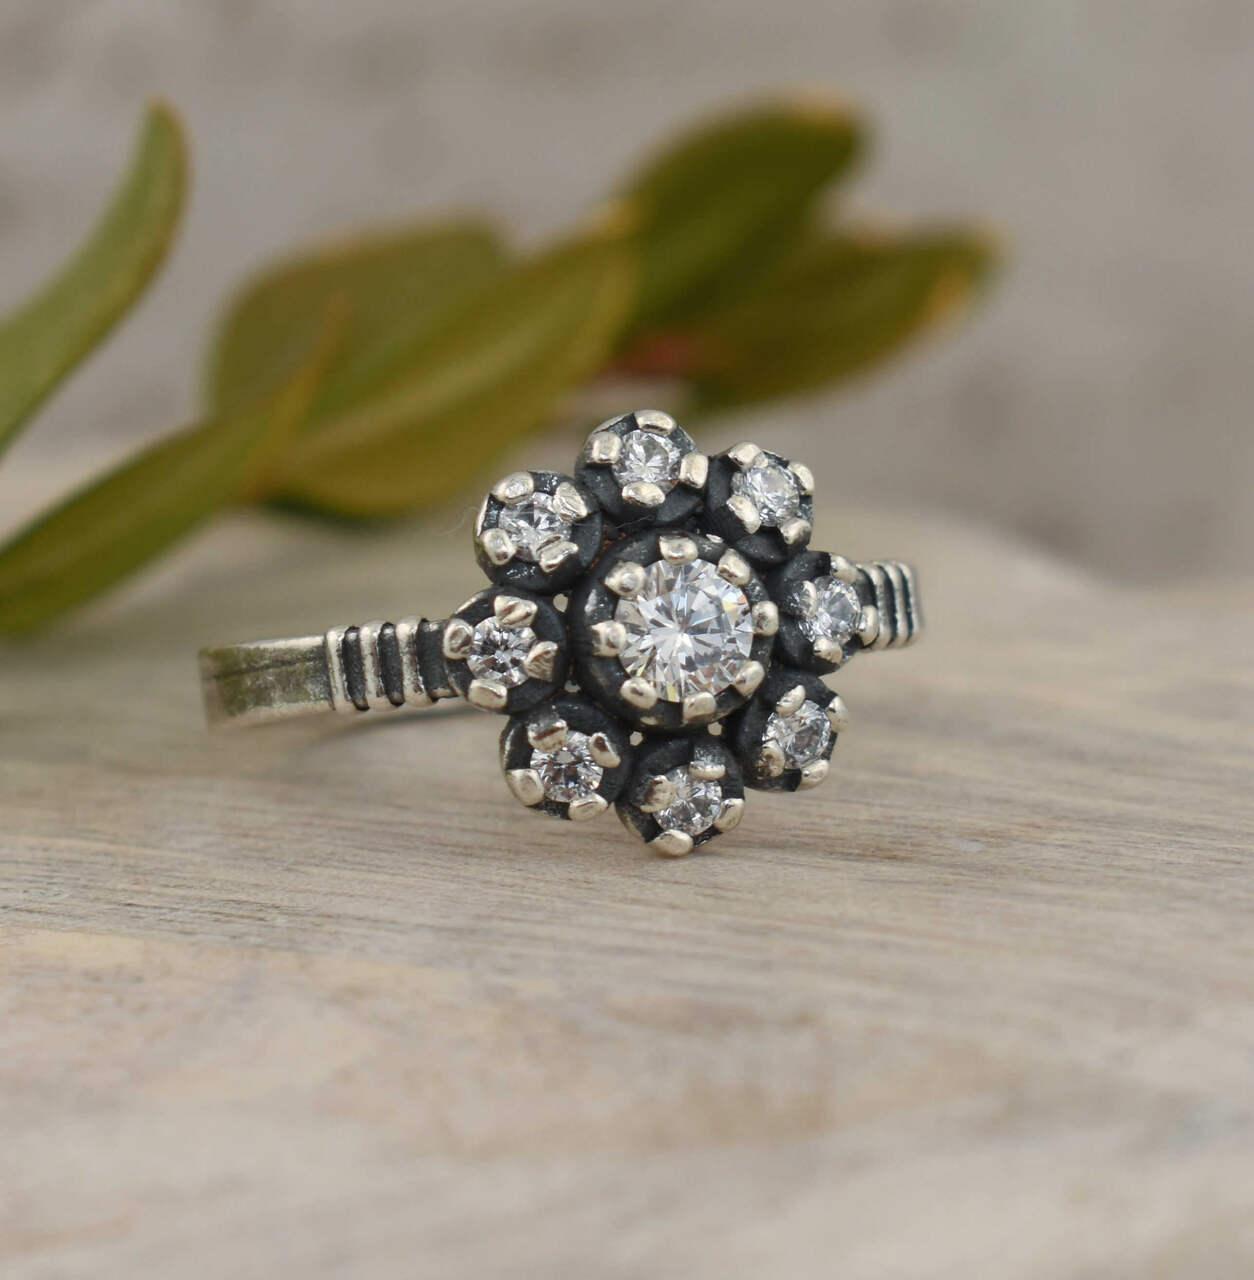 Vintage inspired sterling silver ring with flower design CZ